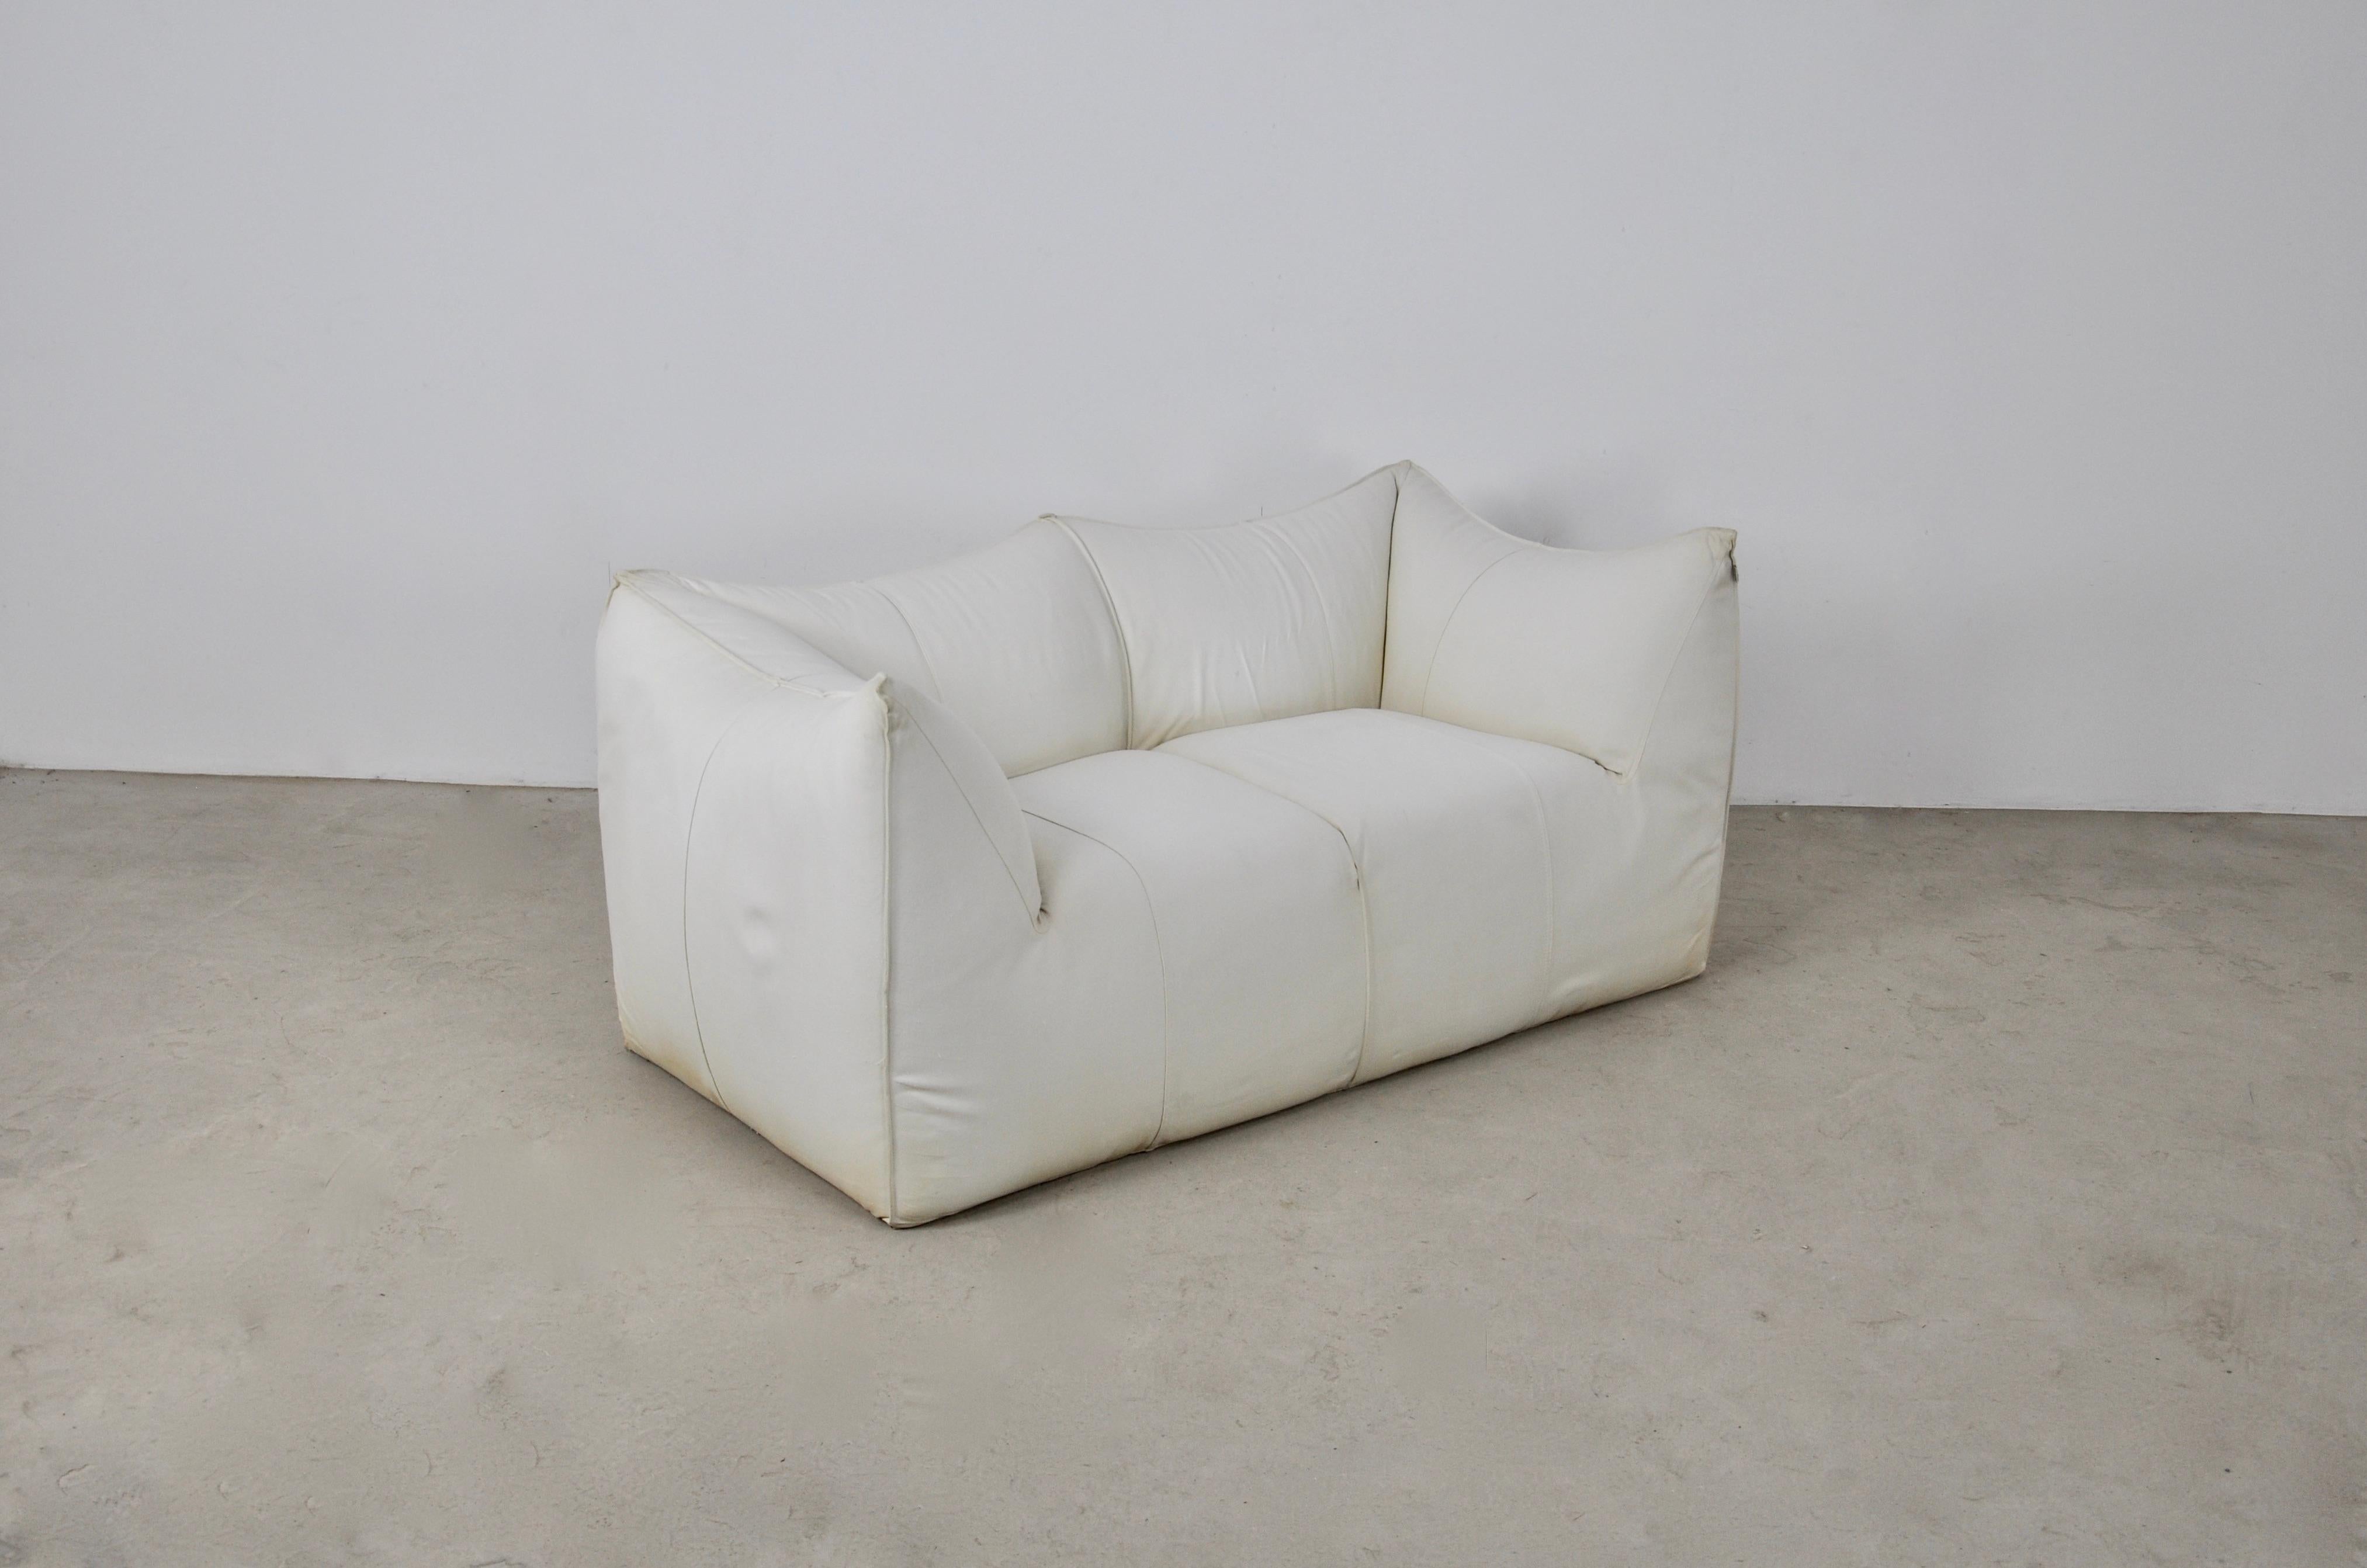 White fabric sofa. B&B label on armrest. Measures: Seat height: 43cm. Wear due to time and age of the chair.